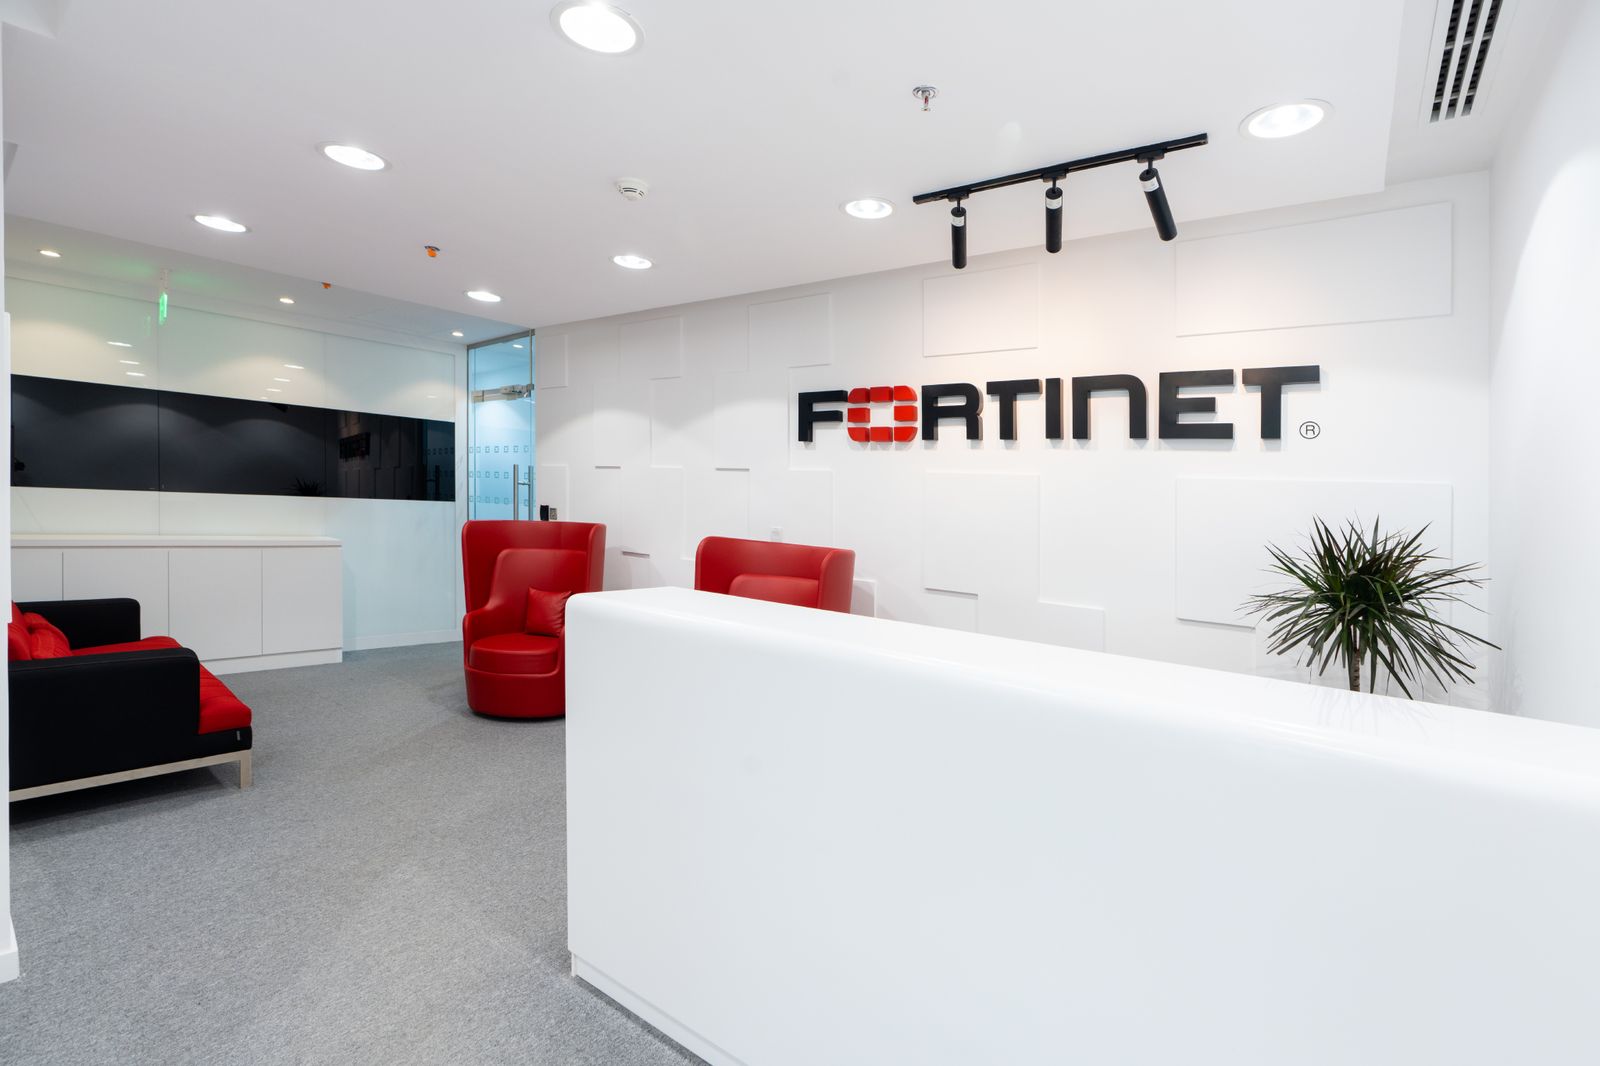 Fortinet- New Offices in Riyadh